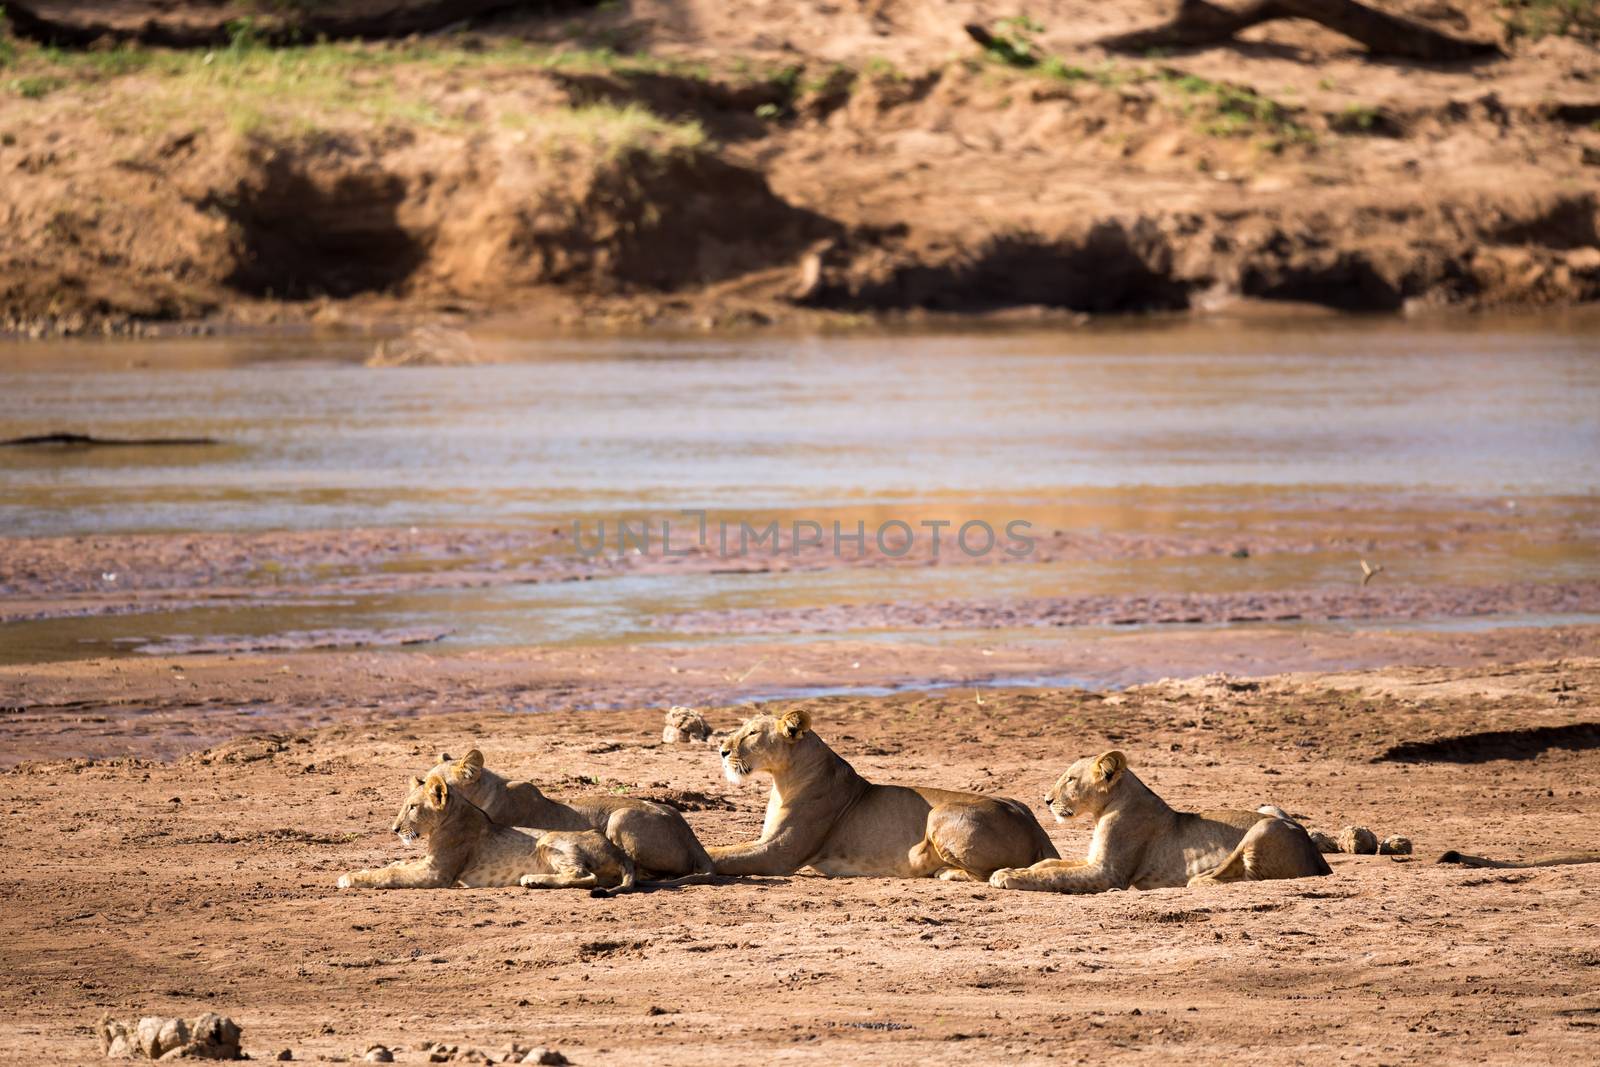 Some lions rest on the bank of a river